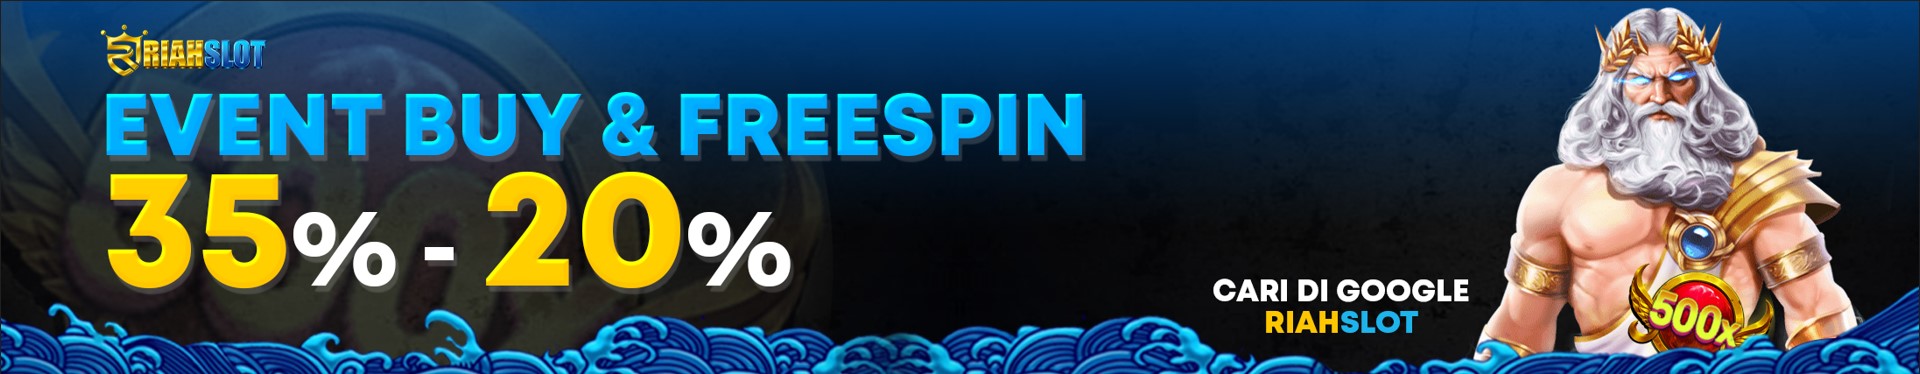 EVENT FREESPIN & BUYSPIN